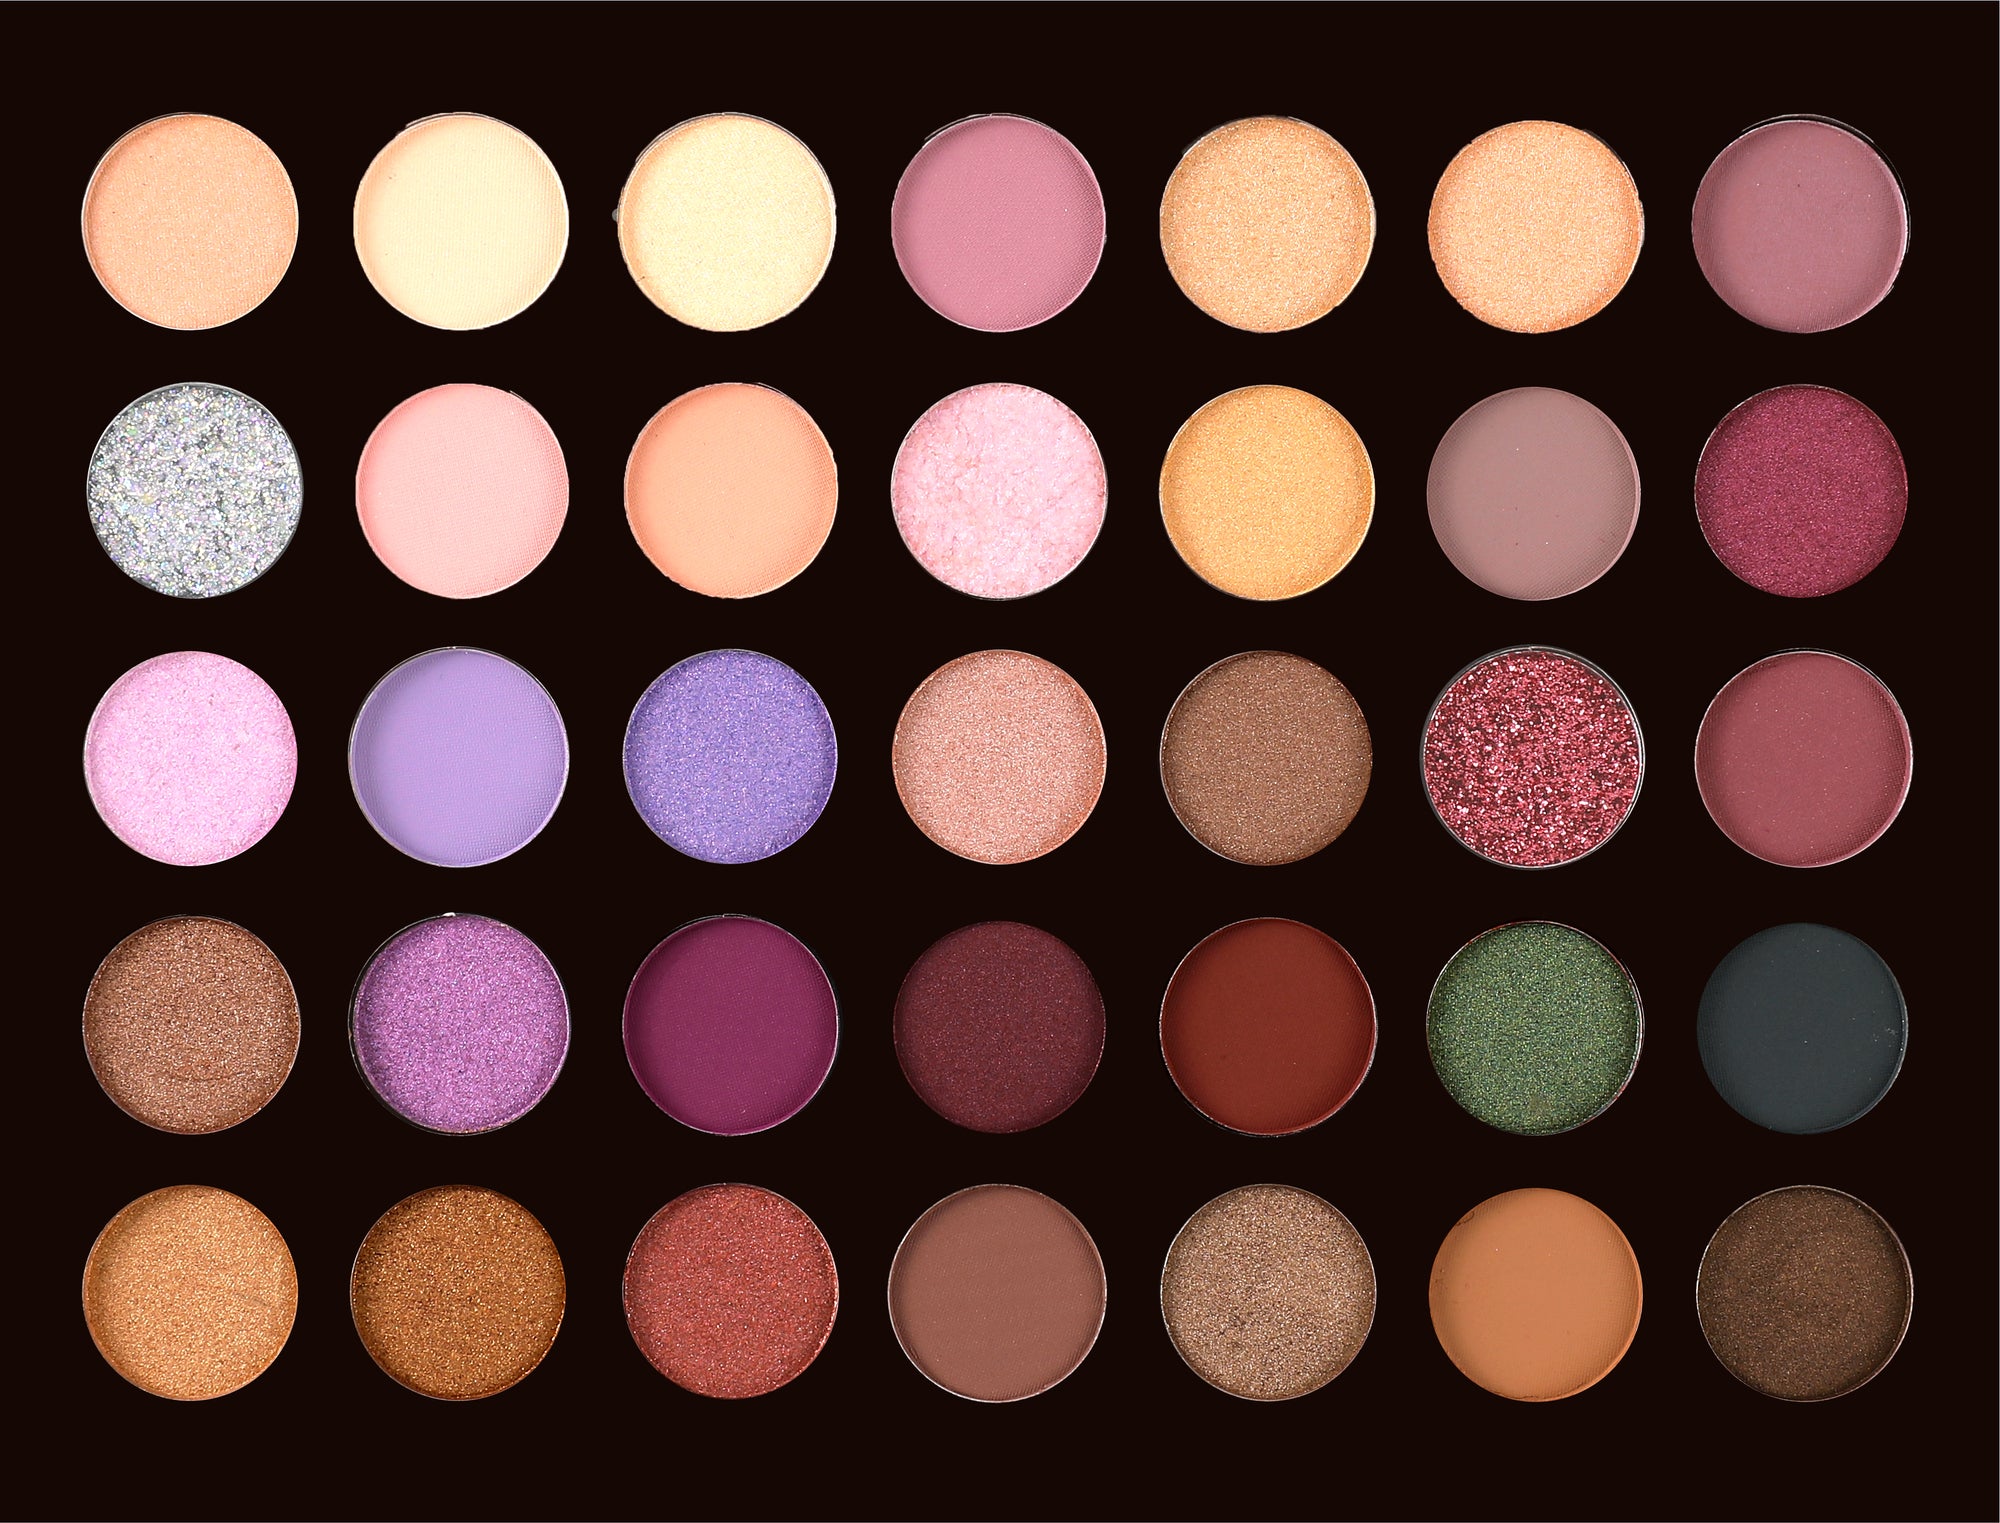 COSMIC COLOUR 35 SHADE PALETTE